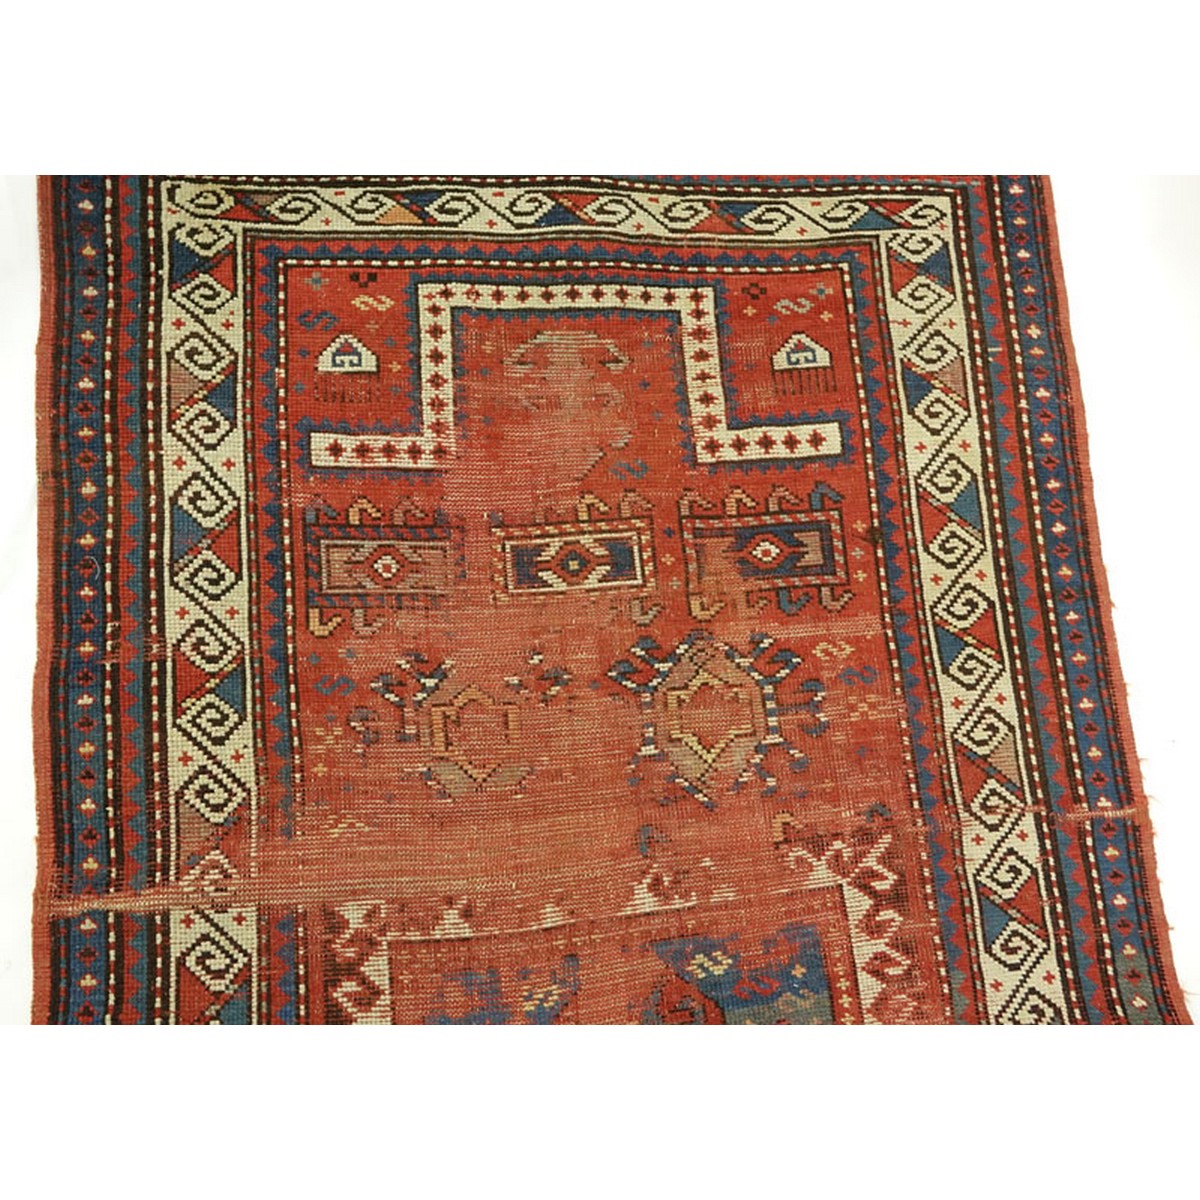 19th Century Caucasian Persian Rug. Unsigned. Quite a bit of wear. Measures 91" x 47". Shipping $75 - Image 2 of 3